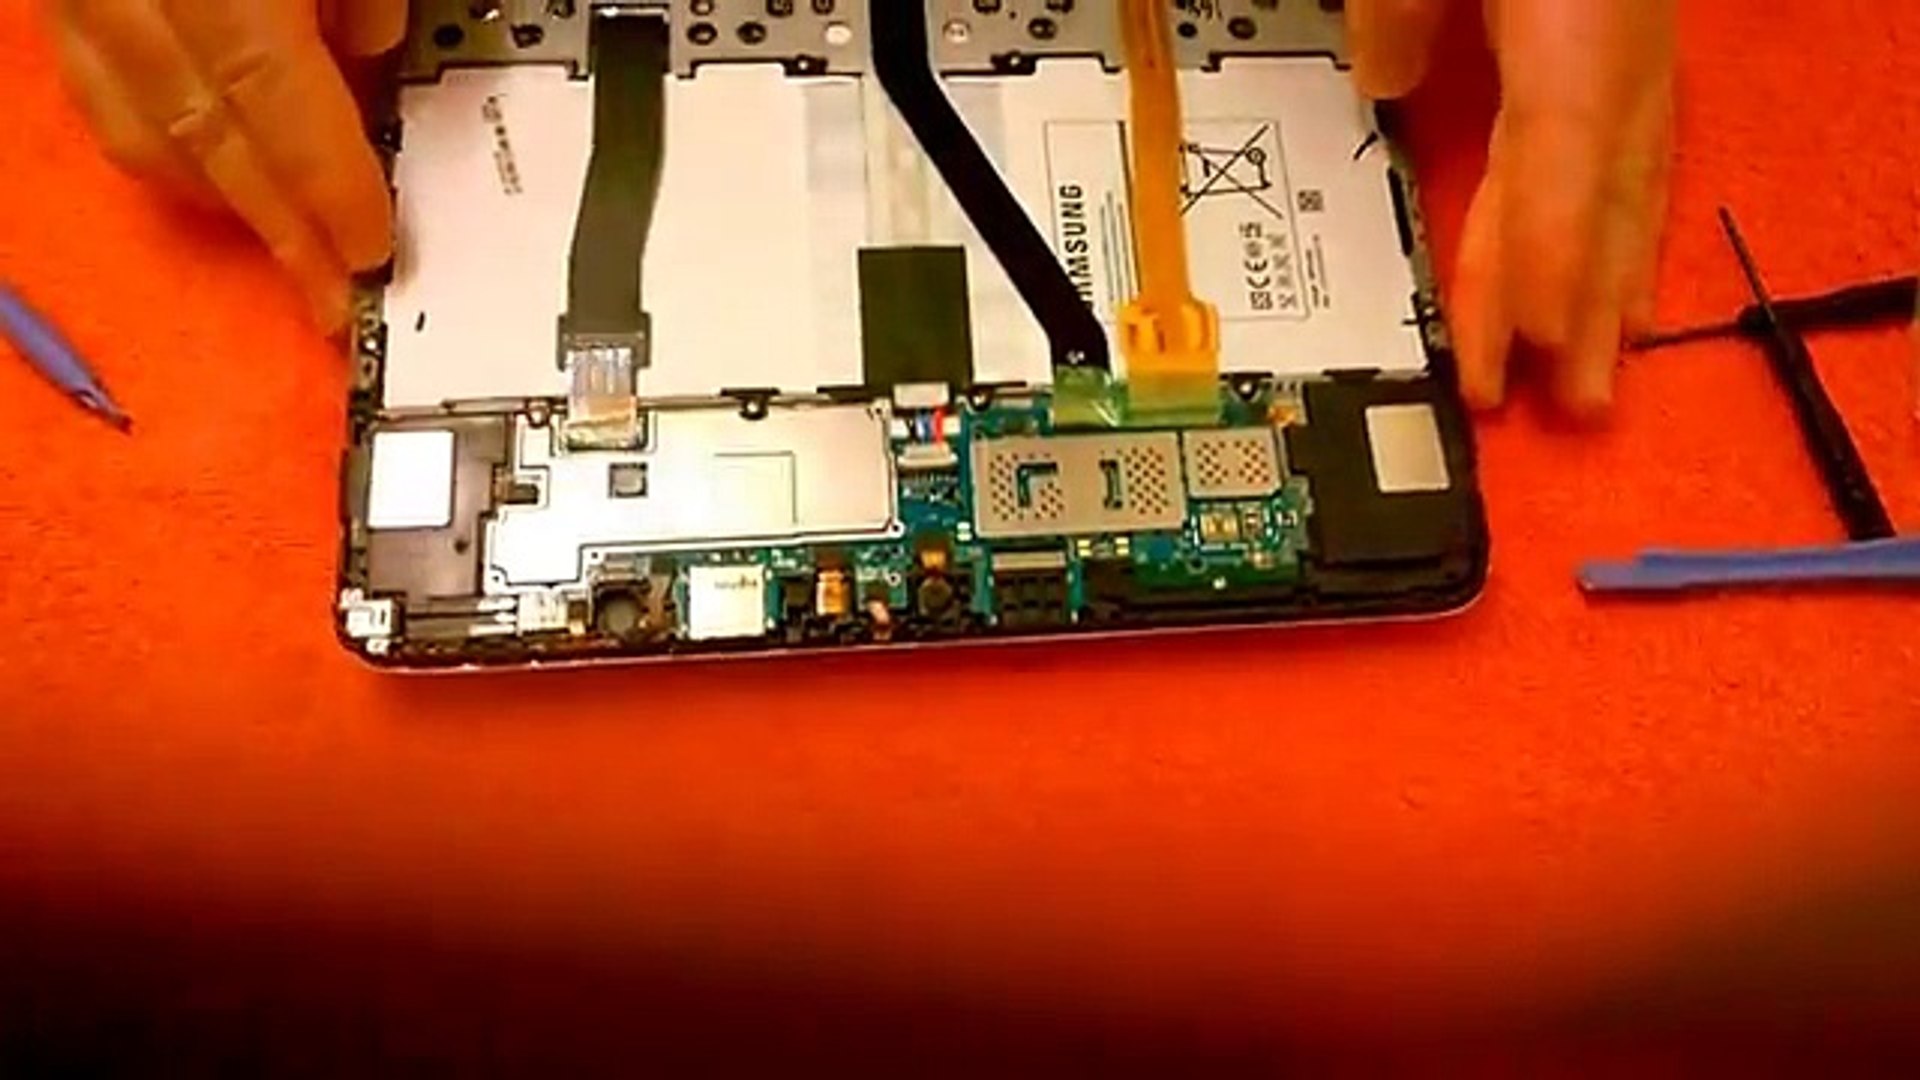 How to Replace Samsung Galaxy Tab 3 10.1 Battery and USB Charging Dock Port  - Dailymotion Video